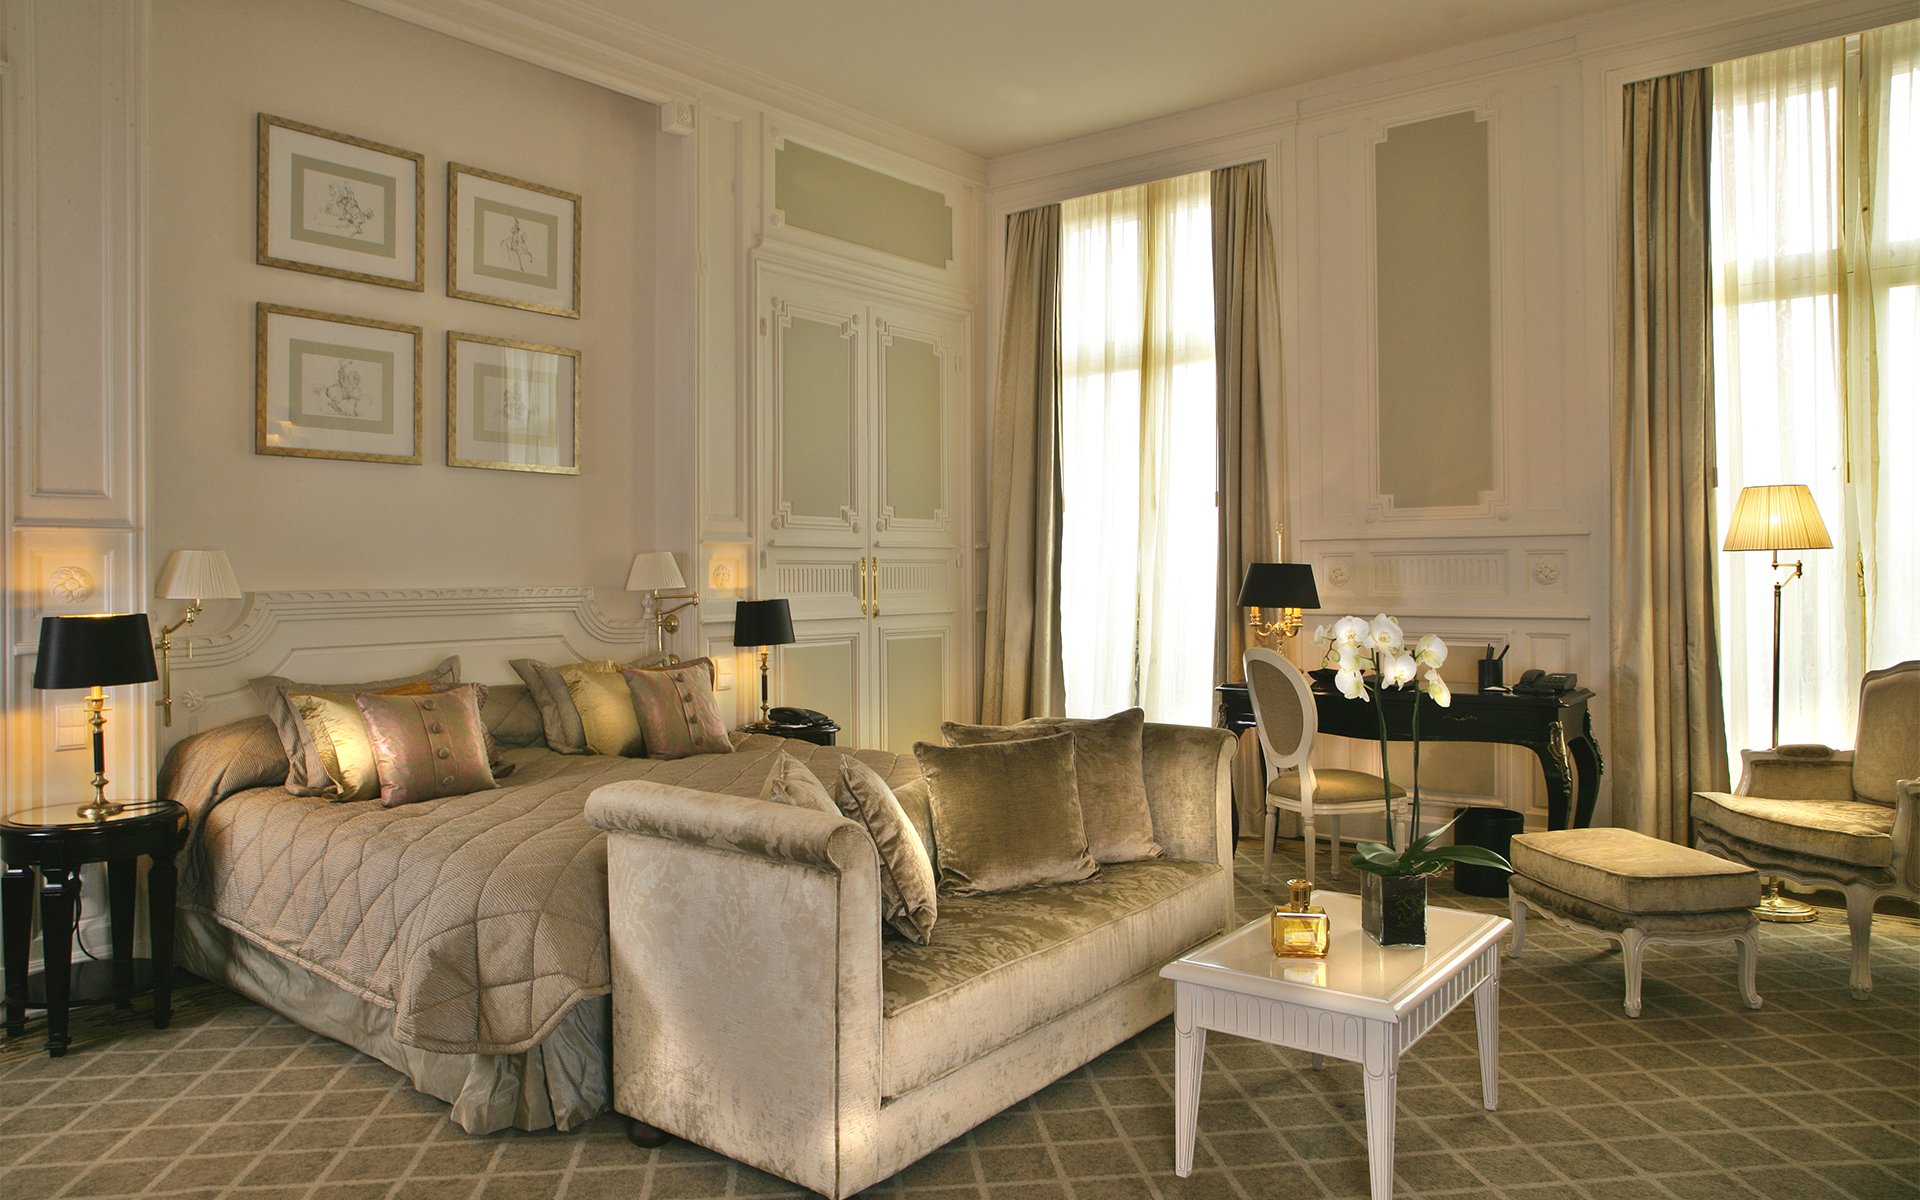 1064/import-from-v1/images/Chambres/Chambre Royale/Chambre-Royale-2.jpg